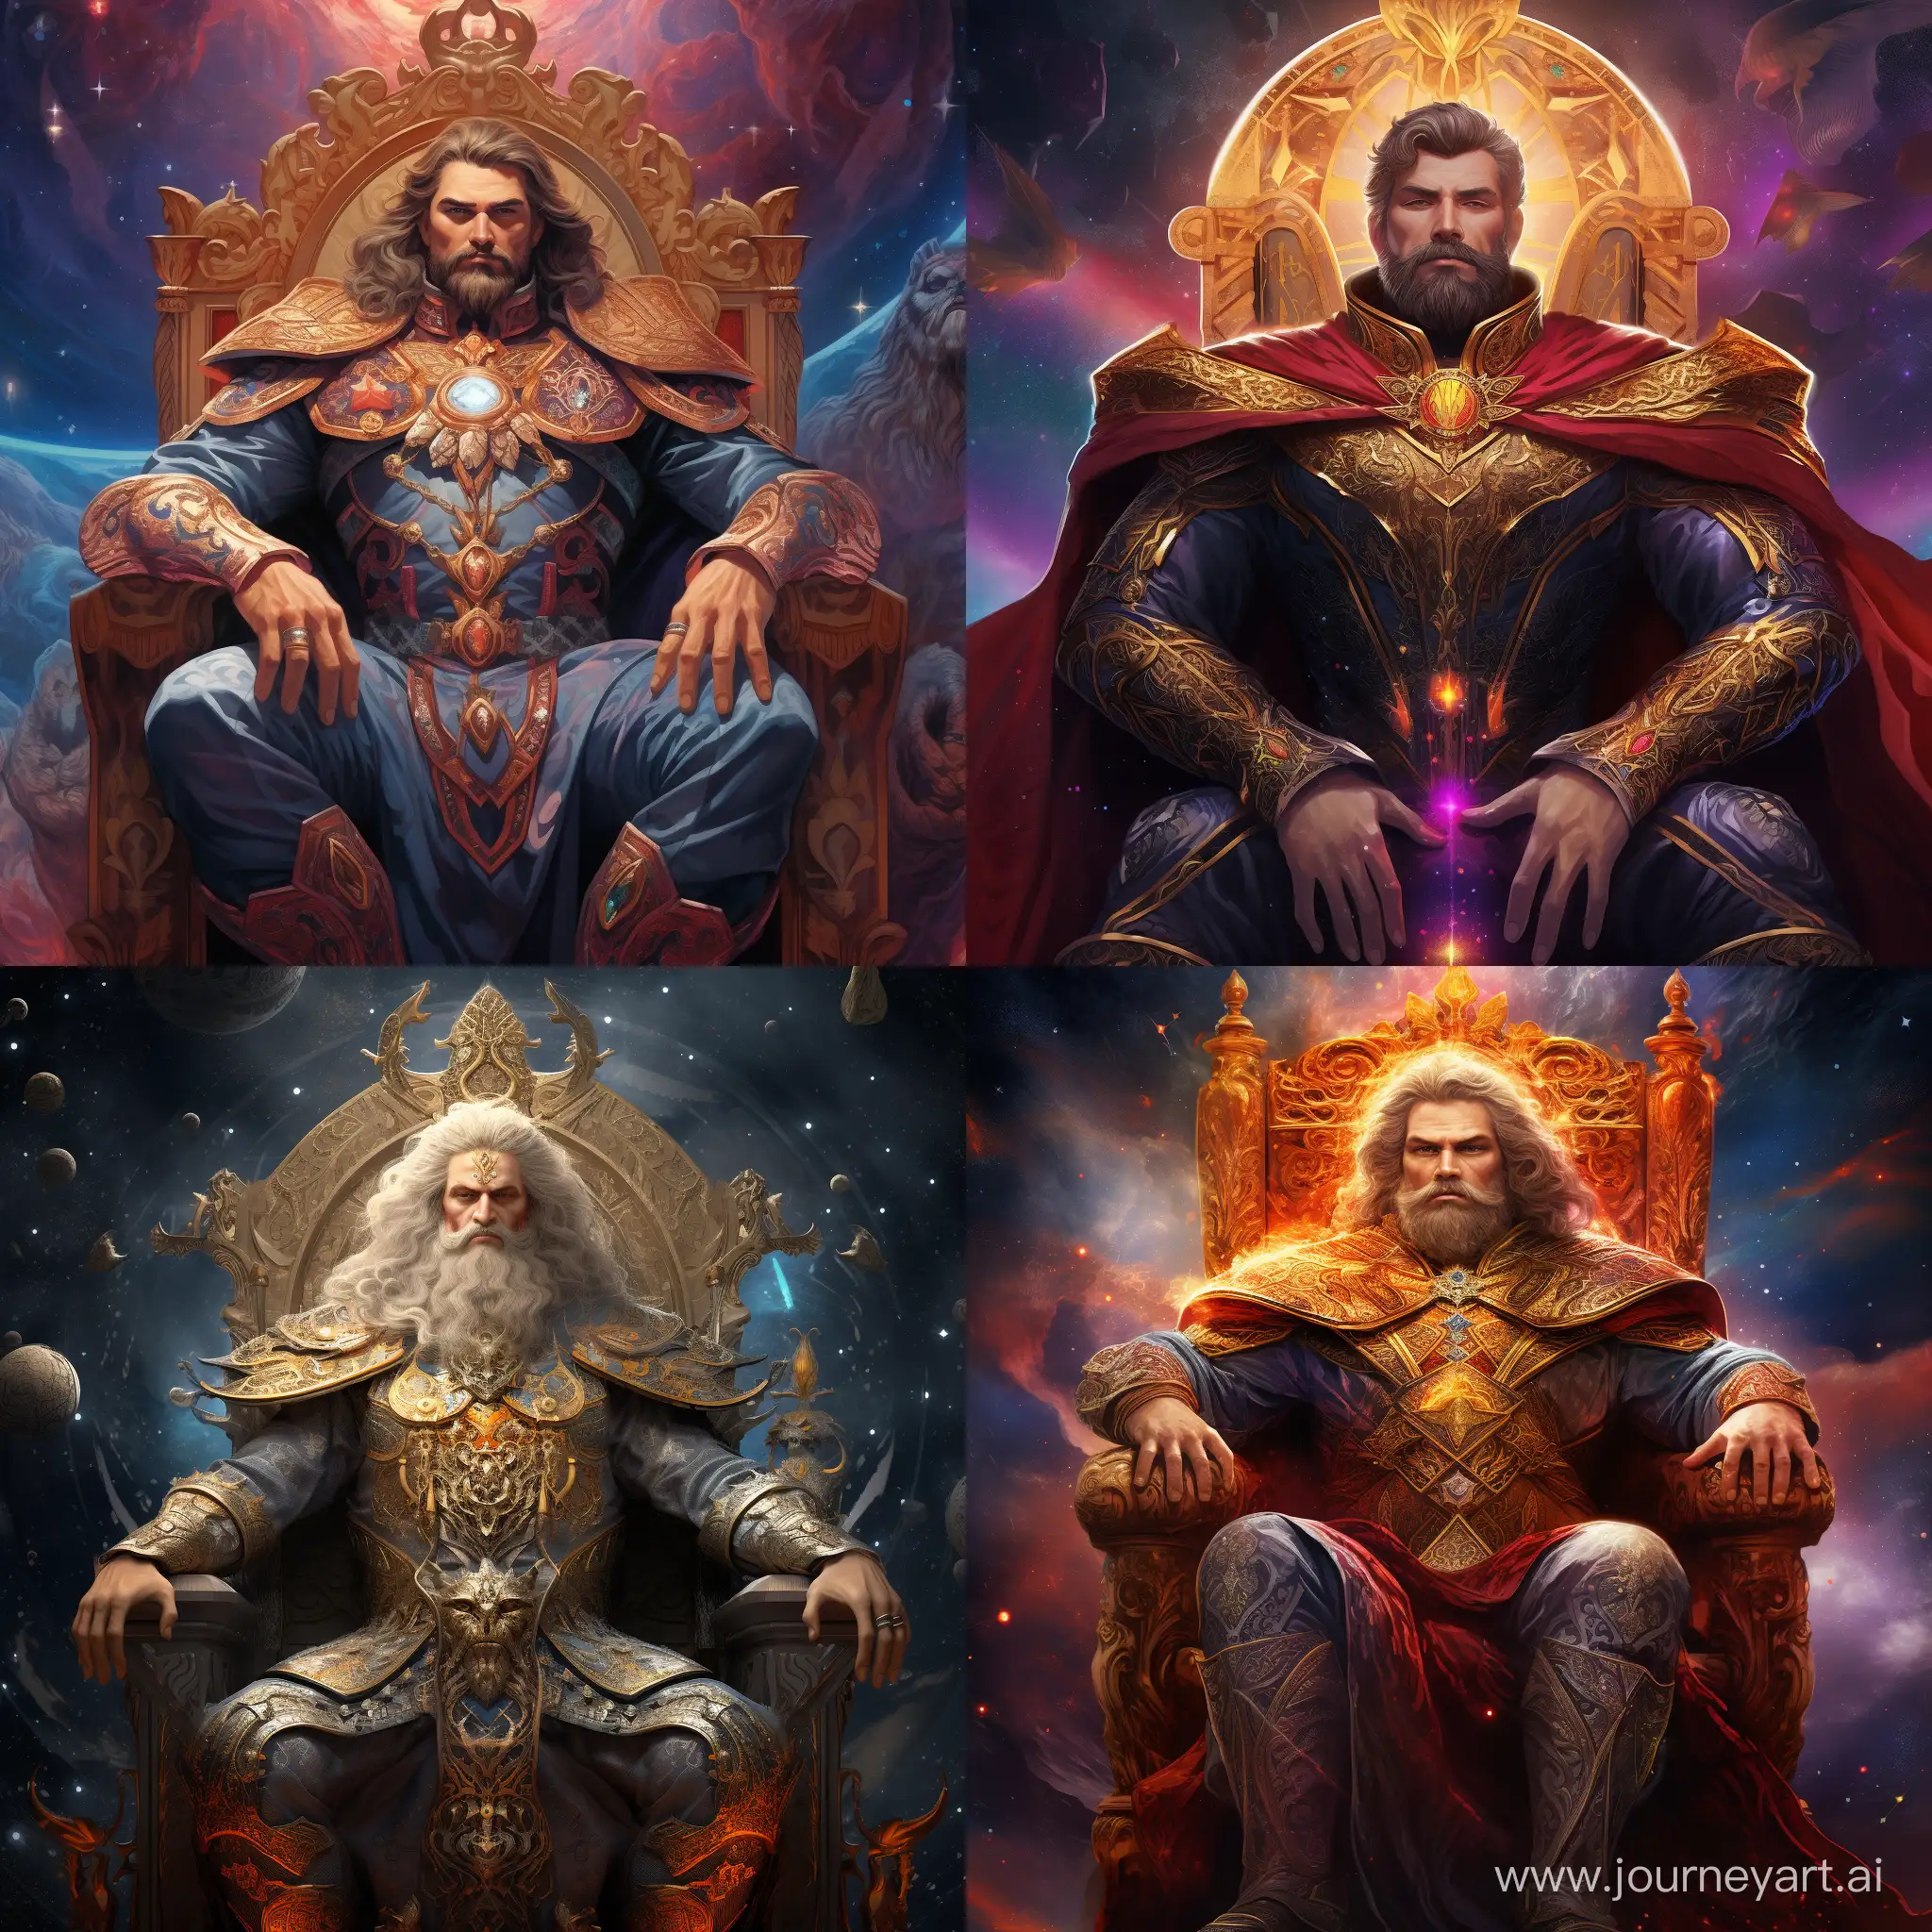 Majestic-Russian-Lord-of-the-Universe-Display-of-Supreme-Power